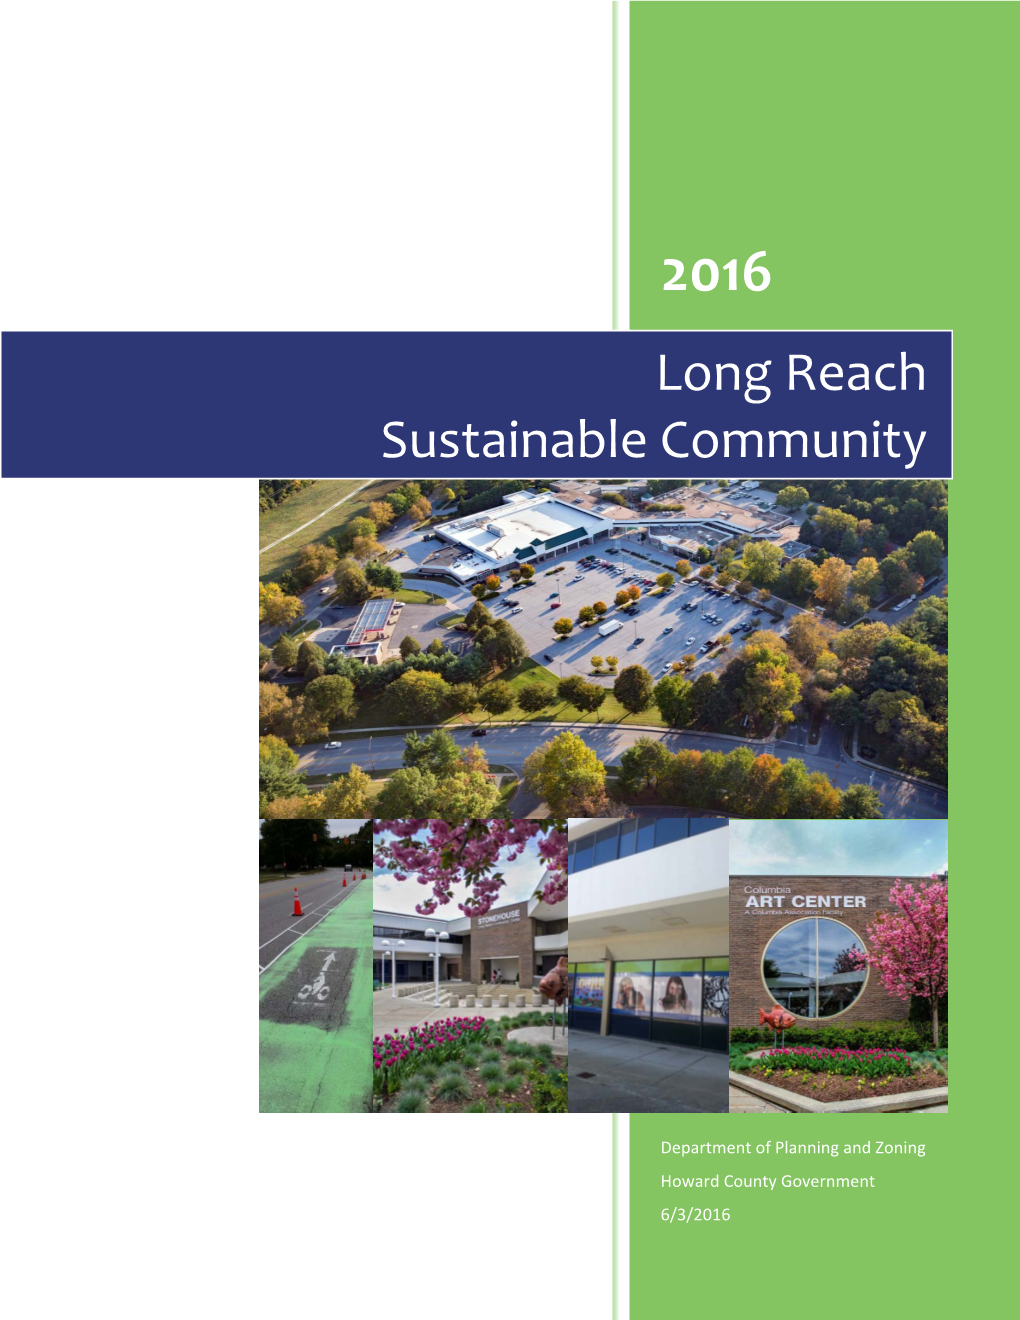 Long Reach Sustainable Community